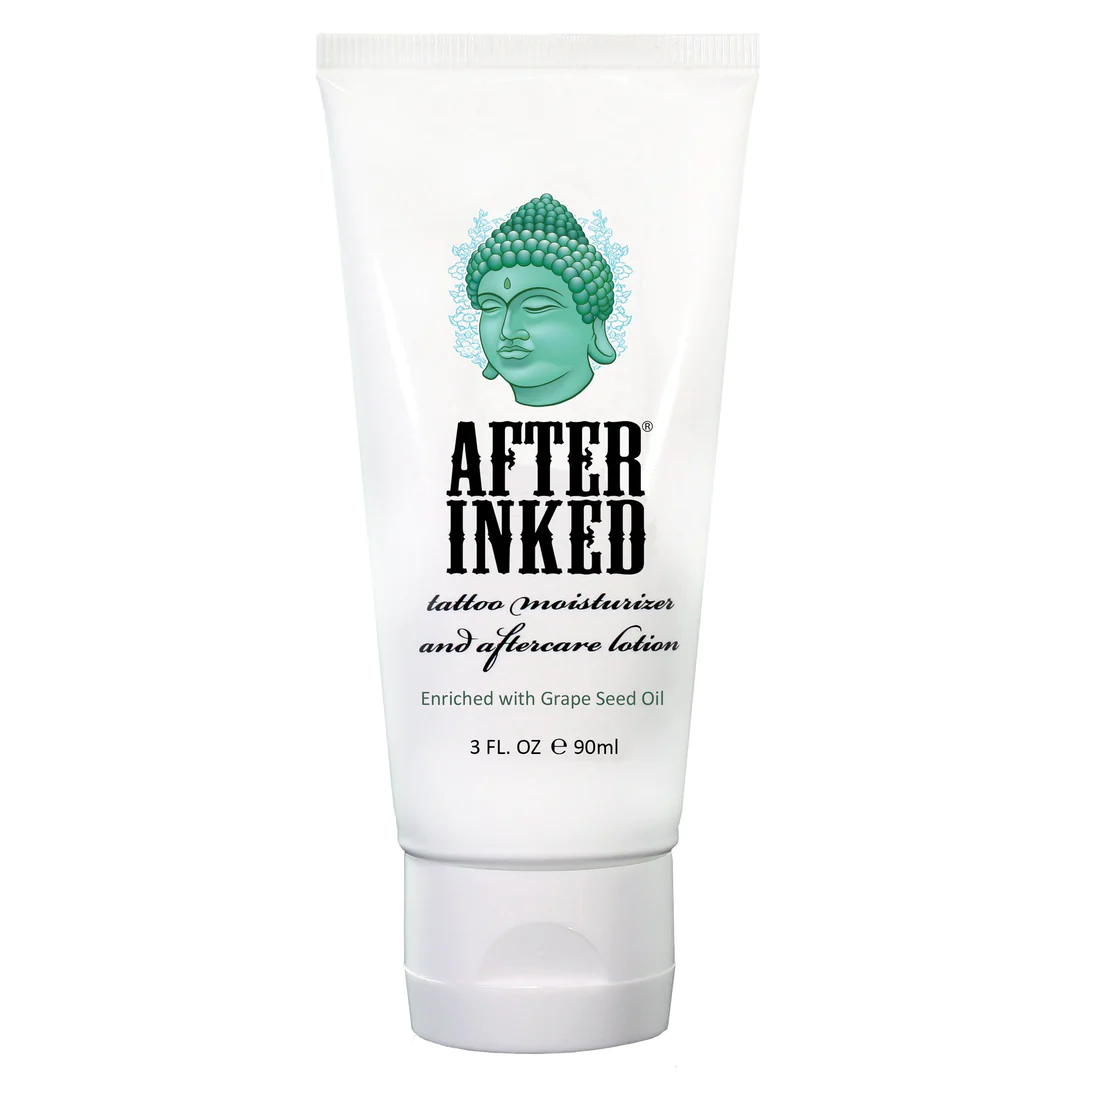 After Inked Tattoo Moisturizer & Aftercare Lotion 3oz